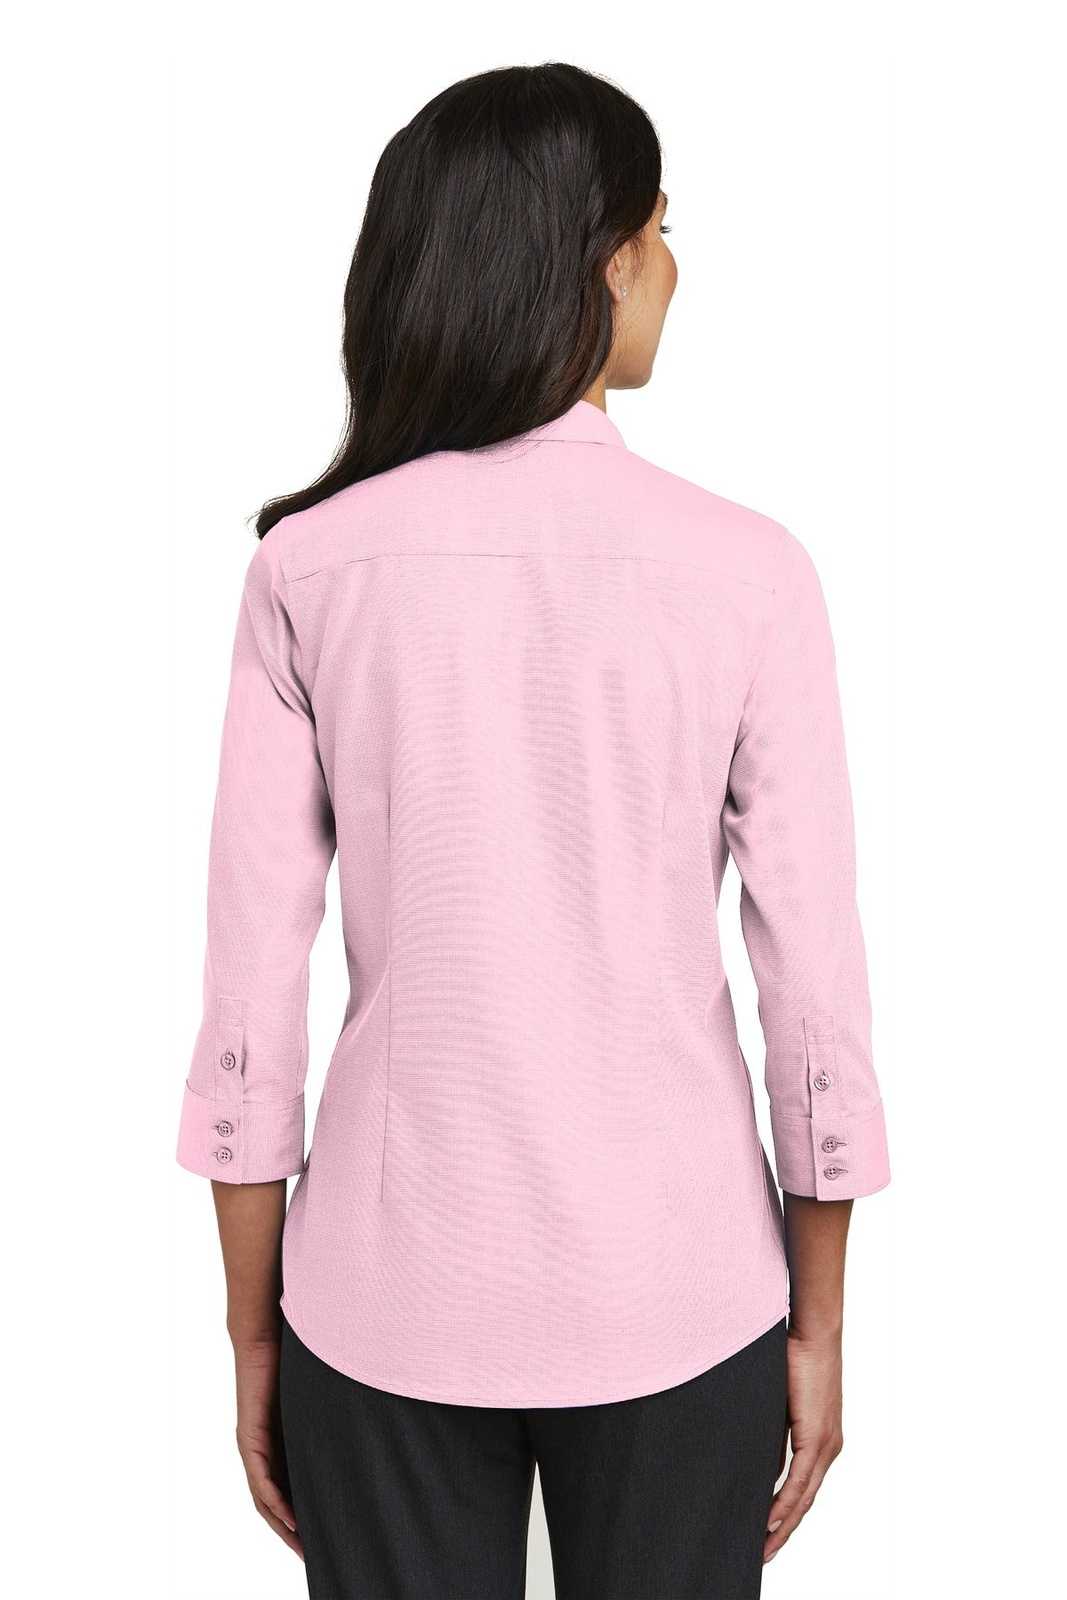 Red House RH690 Ladies 3/4-Sleeve Nailhead Non-Iron Shirt - Pink - HIT a Double - 1